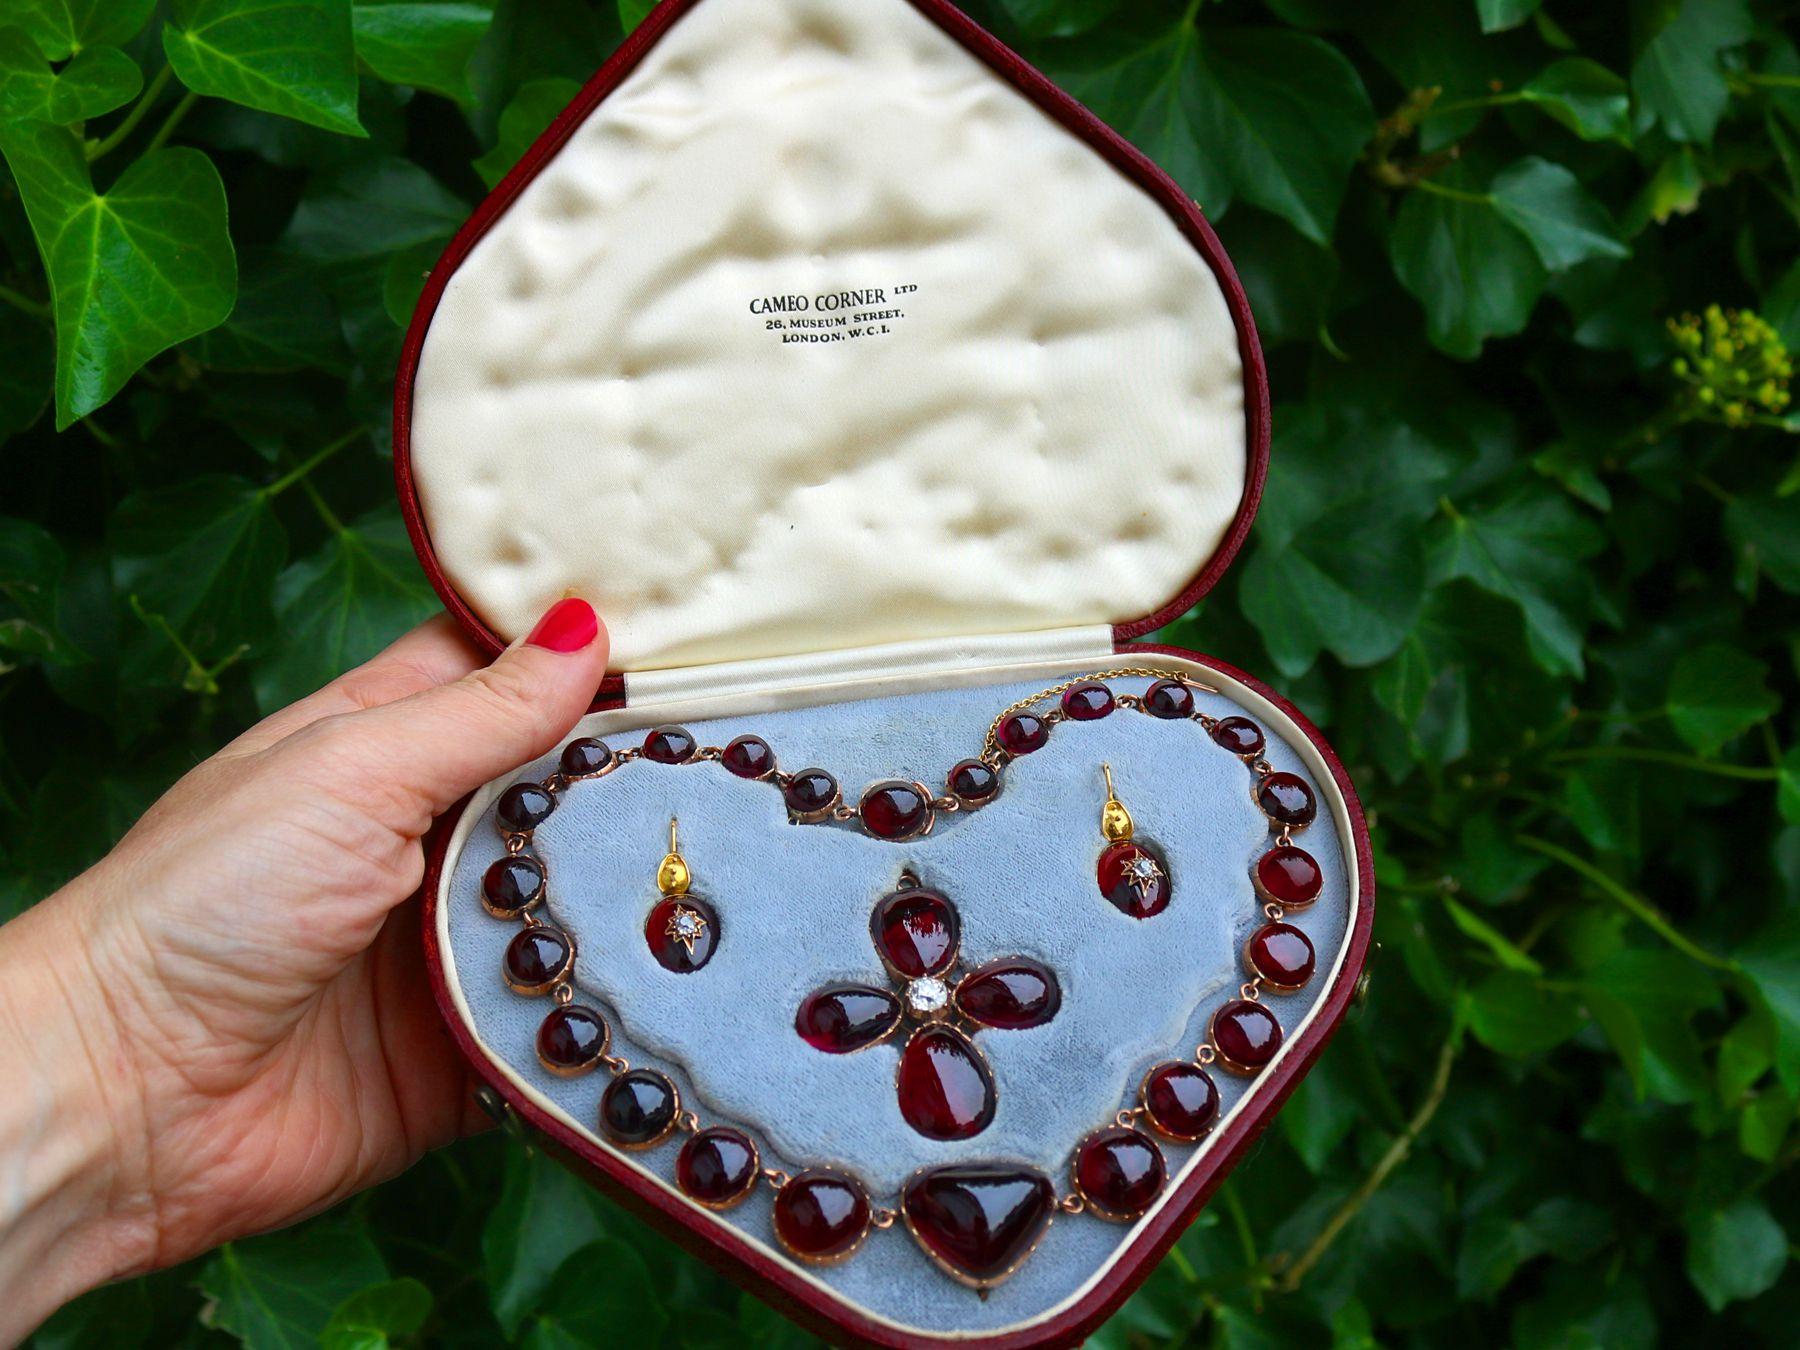 A stunning antique 1820s Regency era 206.60 carat garnet and 1.49 carat diamond, 8k and 9k yellow gold jewelry set; part of our diverse antique jewelry and estate jewelry collections.

This stunning, fine and impressive Regency era cabochon cut